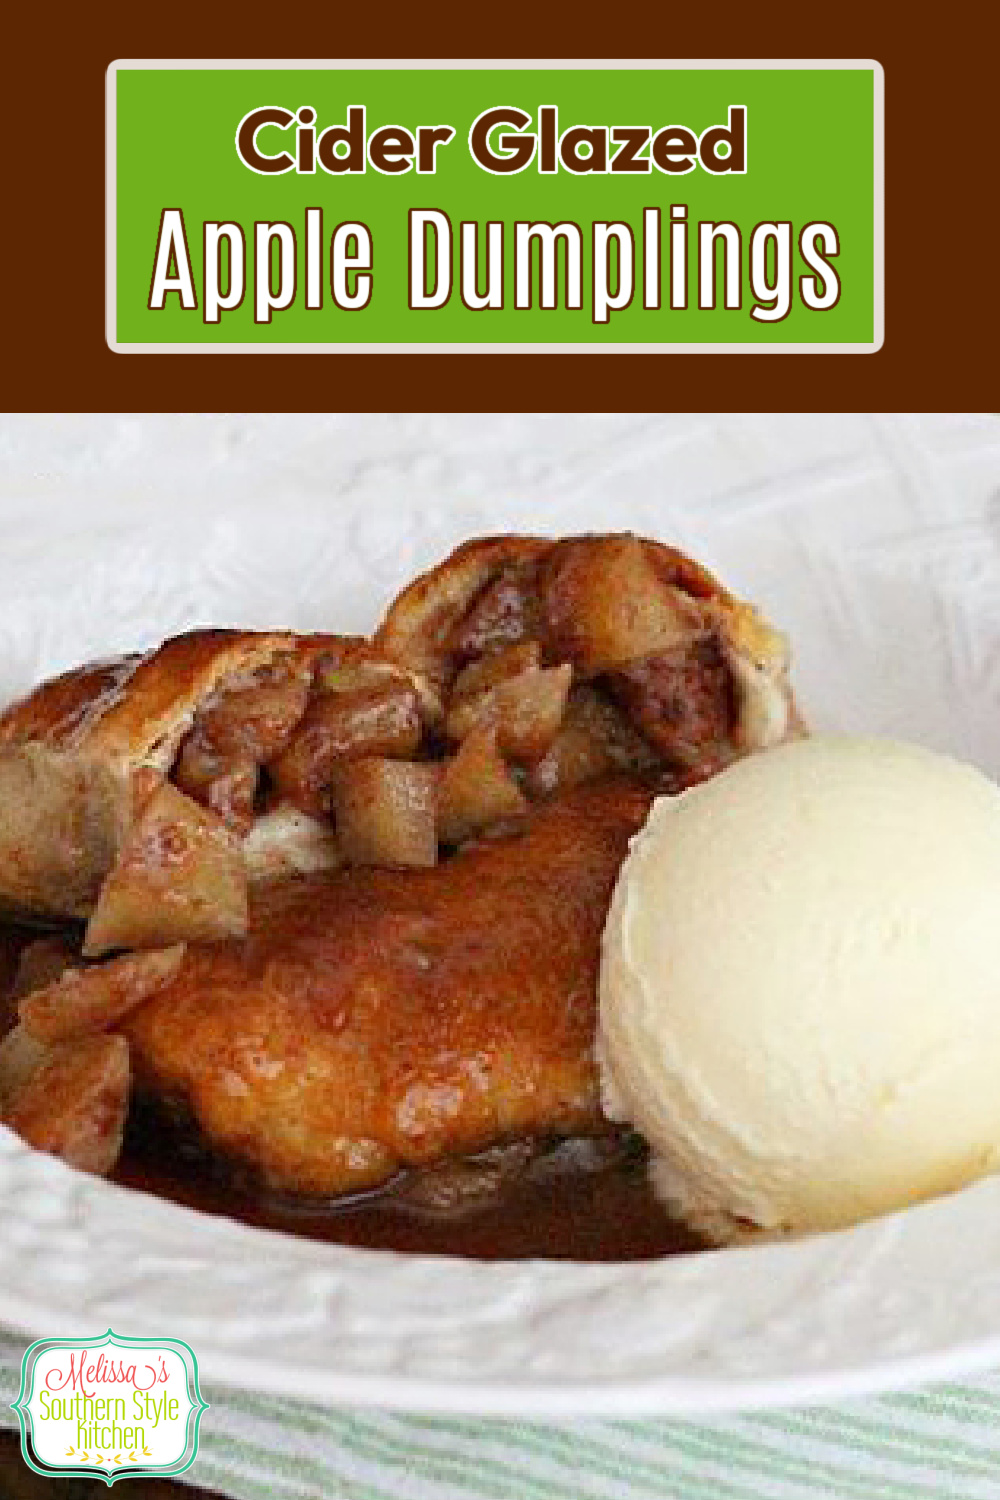 These Apple Dumplings are basted with a cider glaze then, baked until golden. #appledumplings #apples #dumplings #applerecipes #applepies #fallbaking #falldesserts #thanksgiving #southernfood #southernrecipes #dessertws #dessertfoodrecipes #appletarts